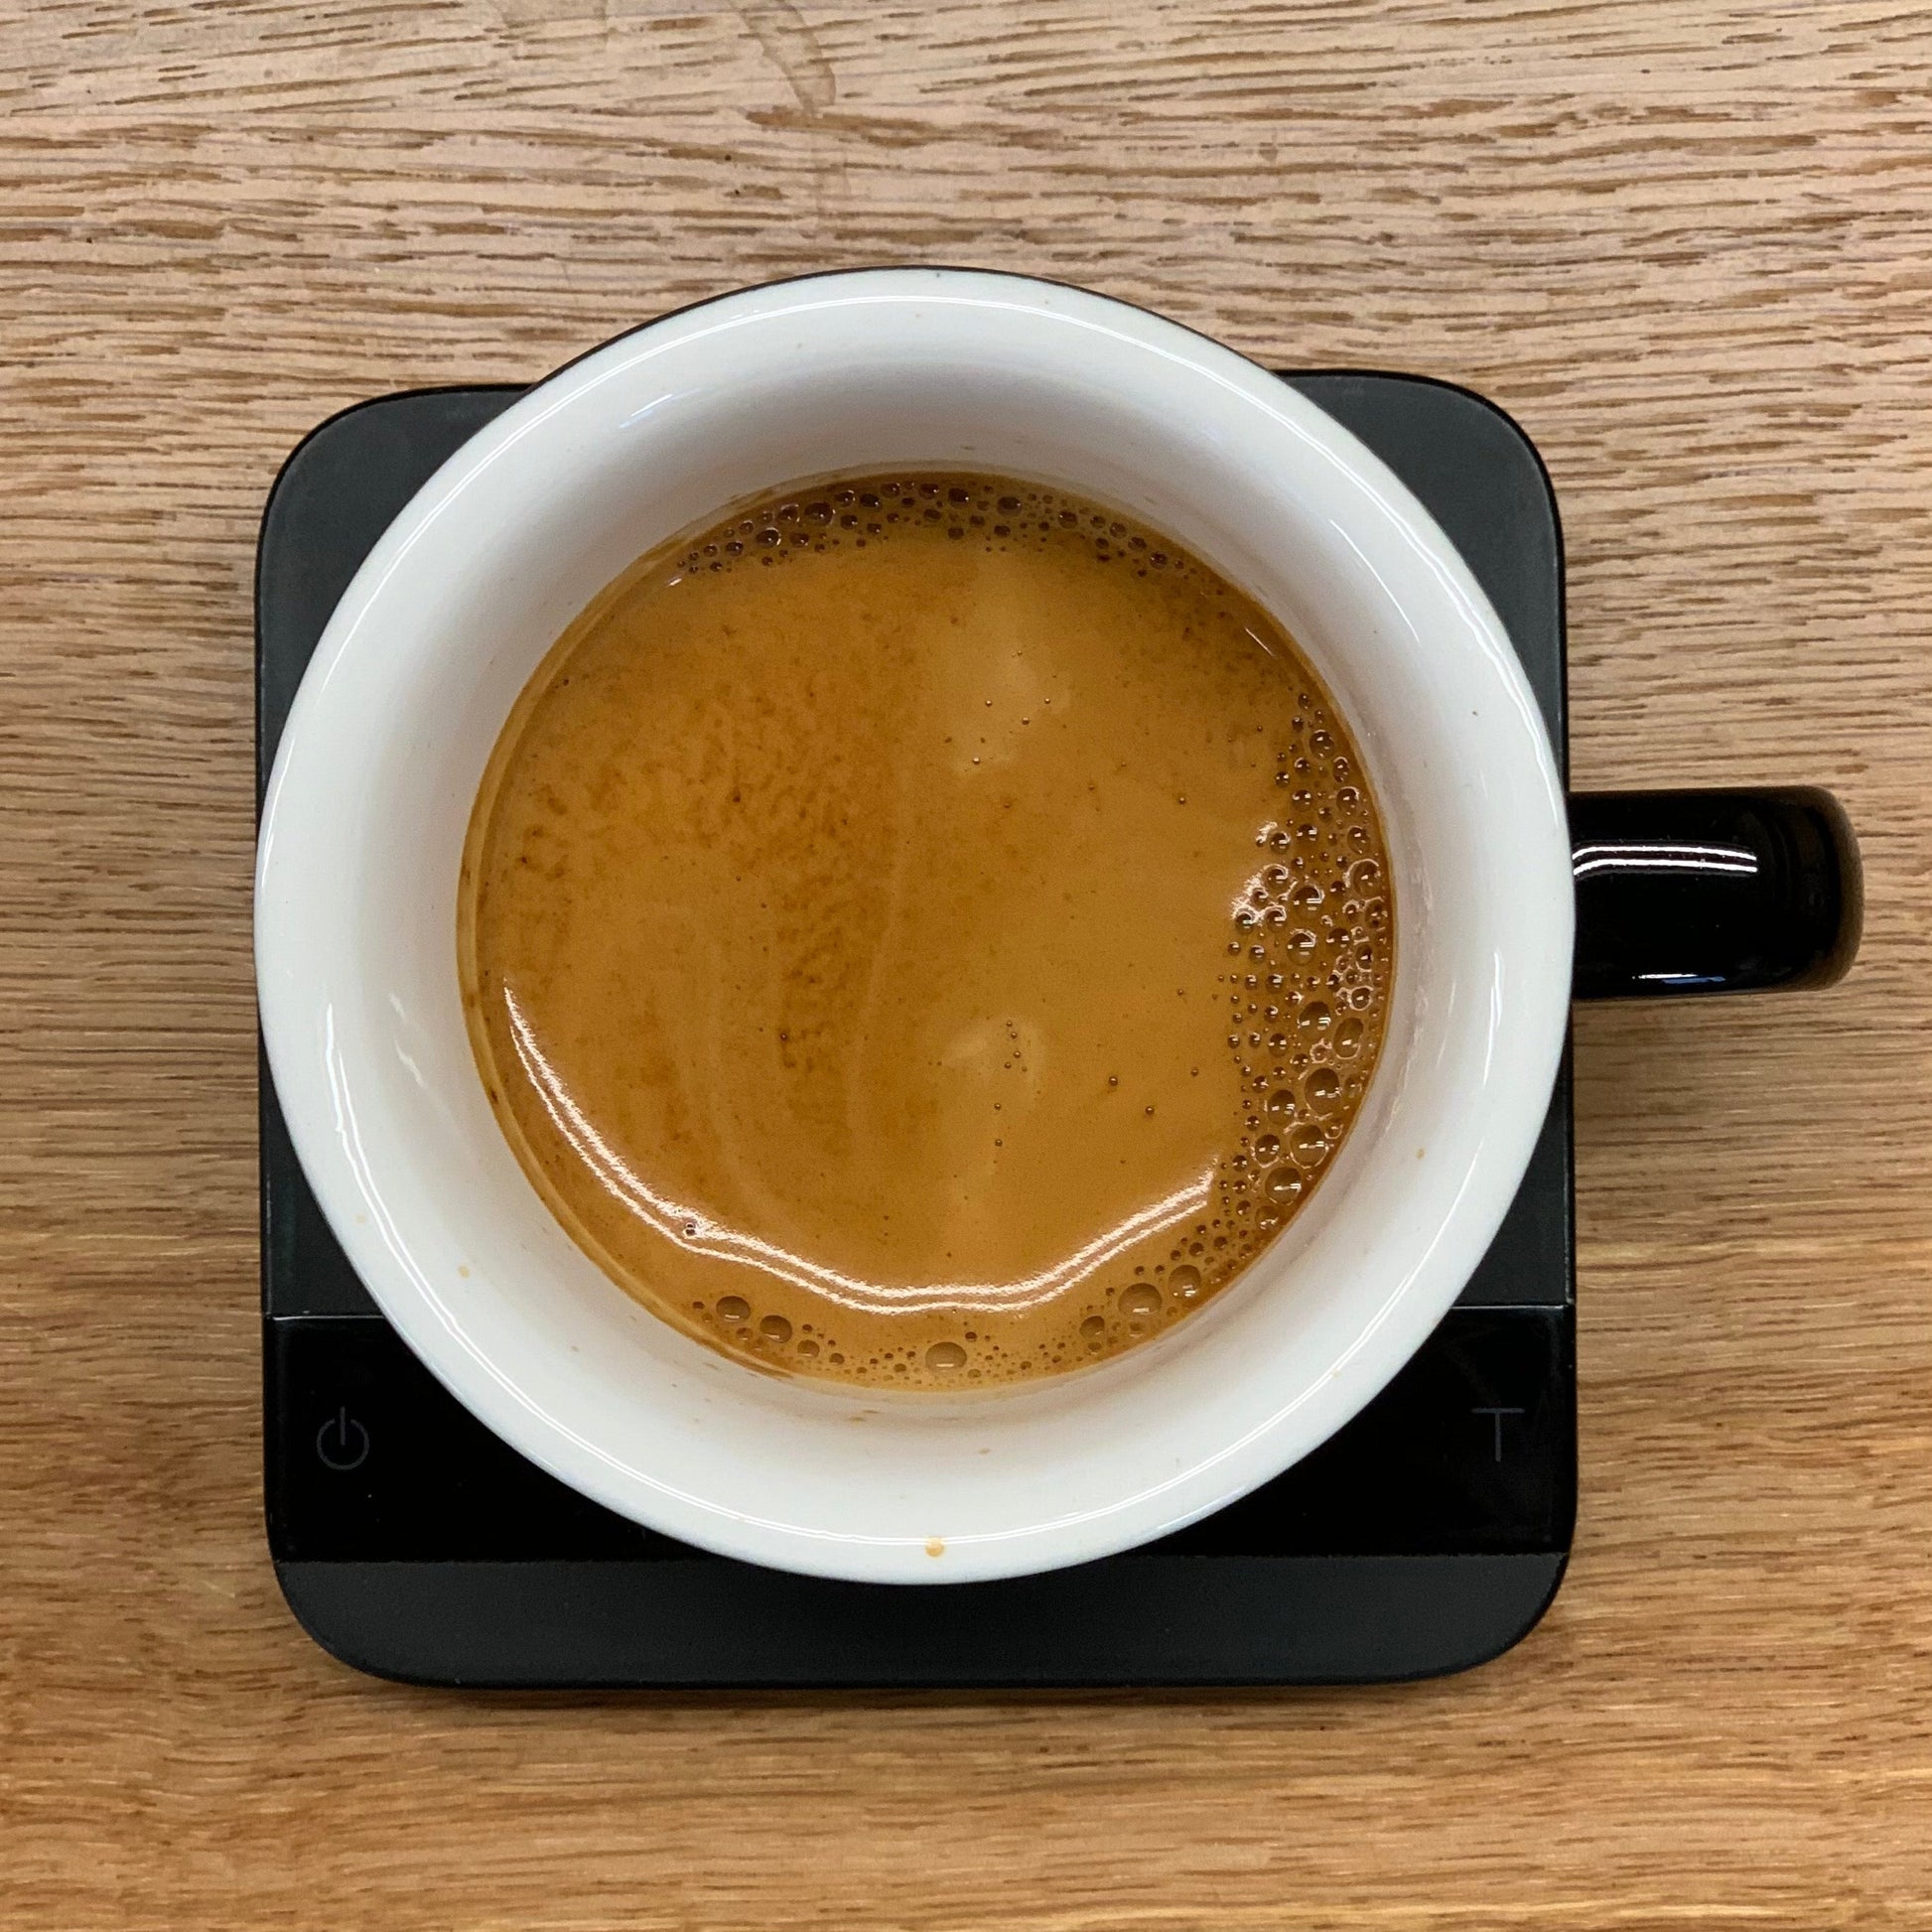 Overhead view of a ceramic espresso cup filled with freshly brewed coffee